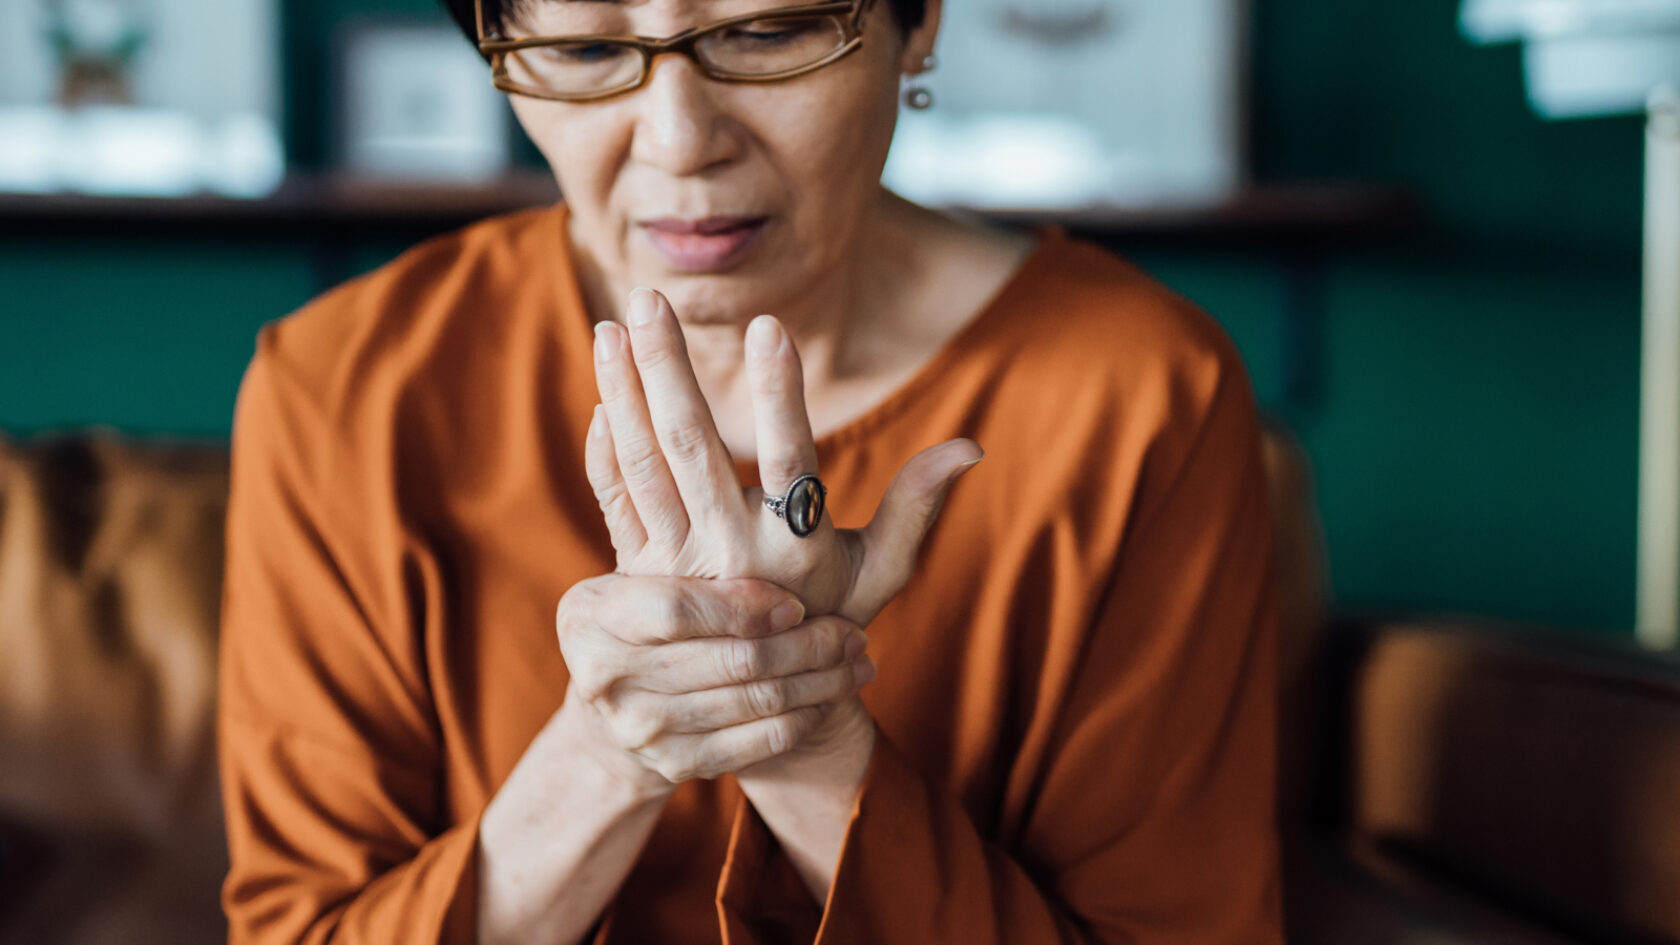 A woman rubs her hand in discomfort.